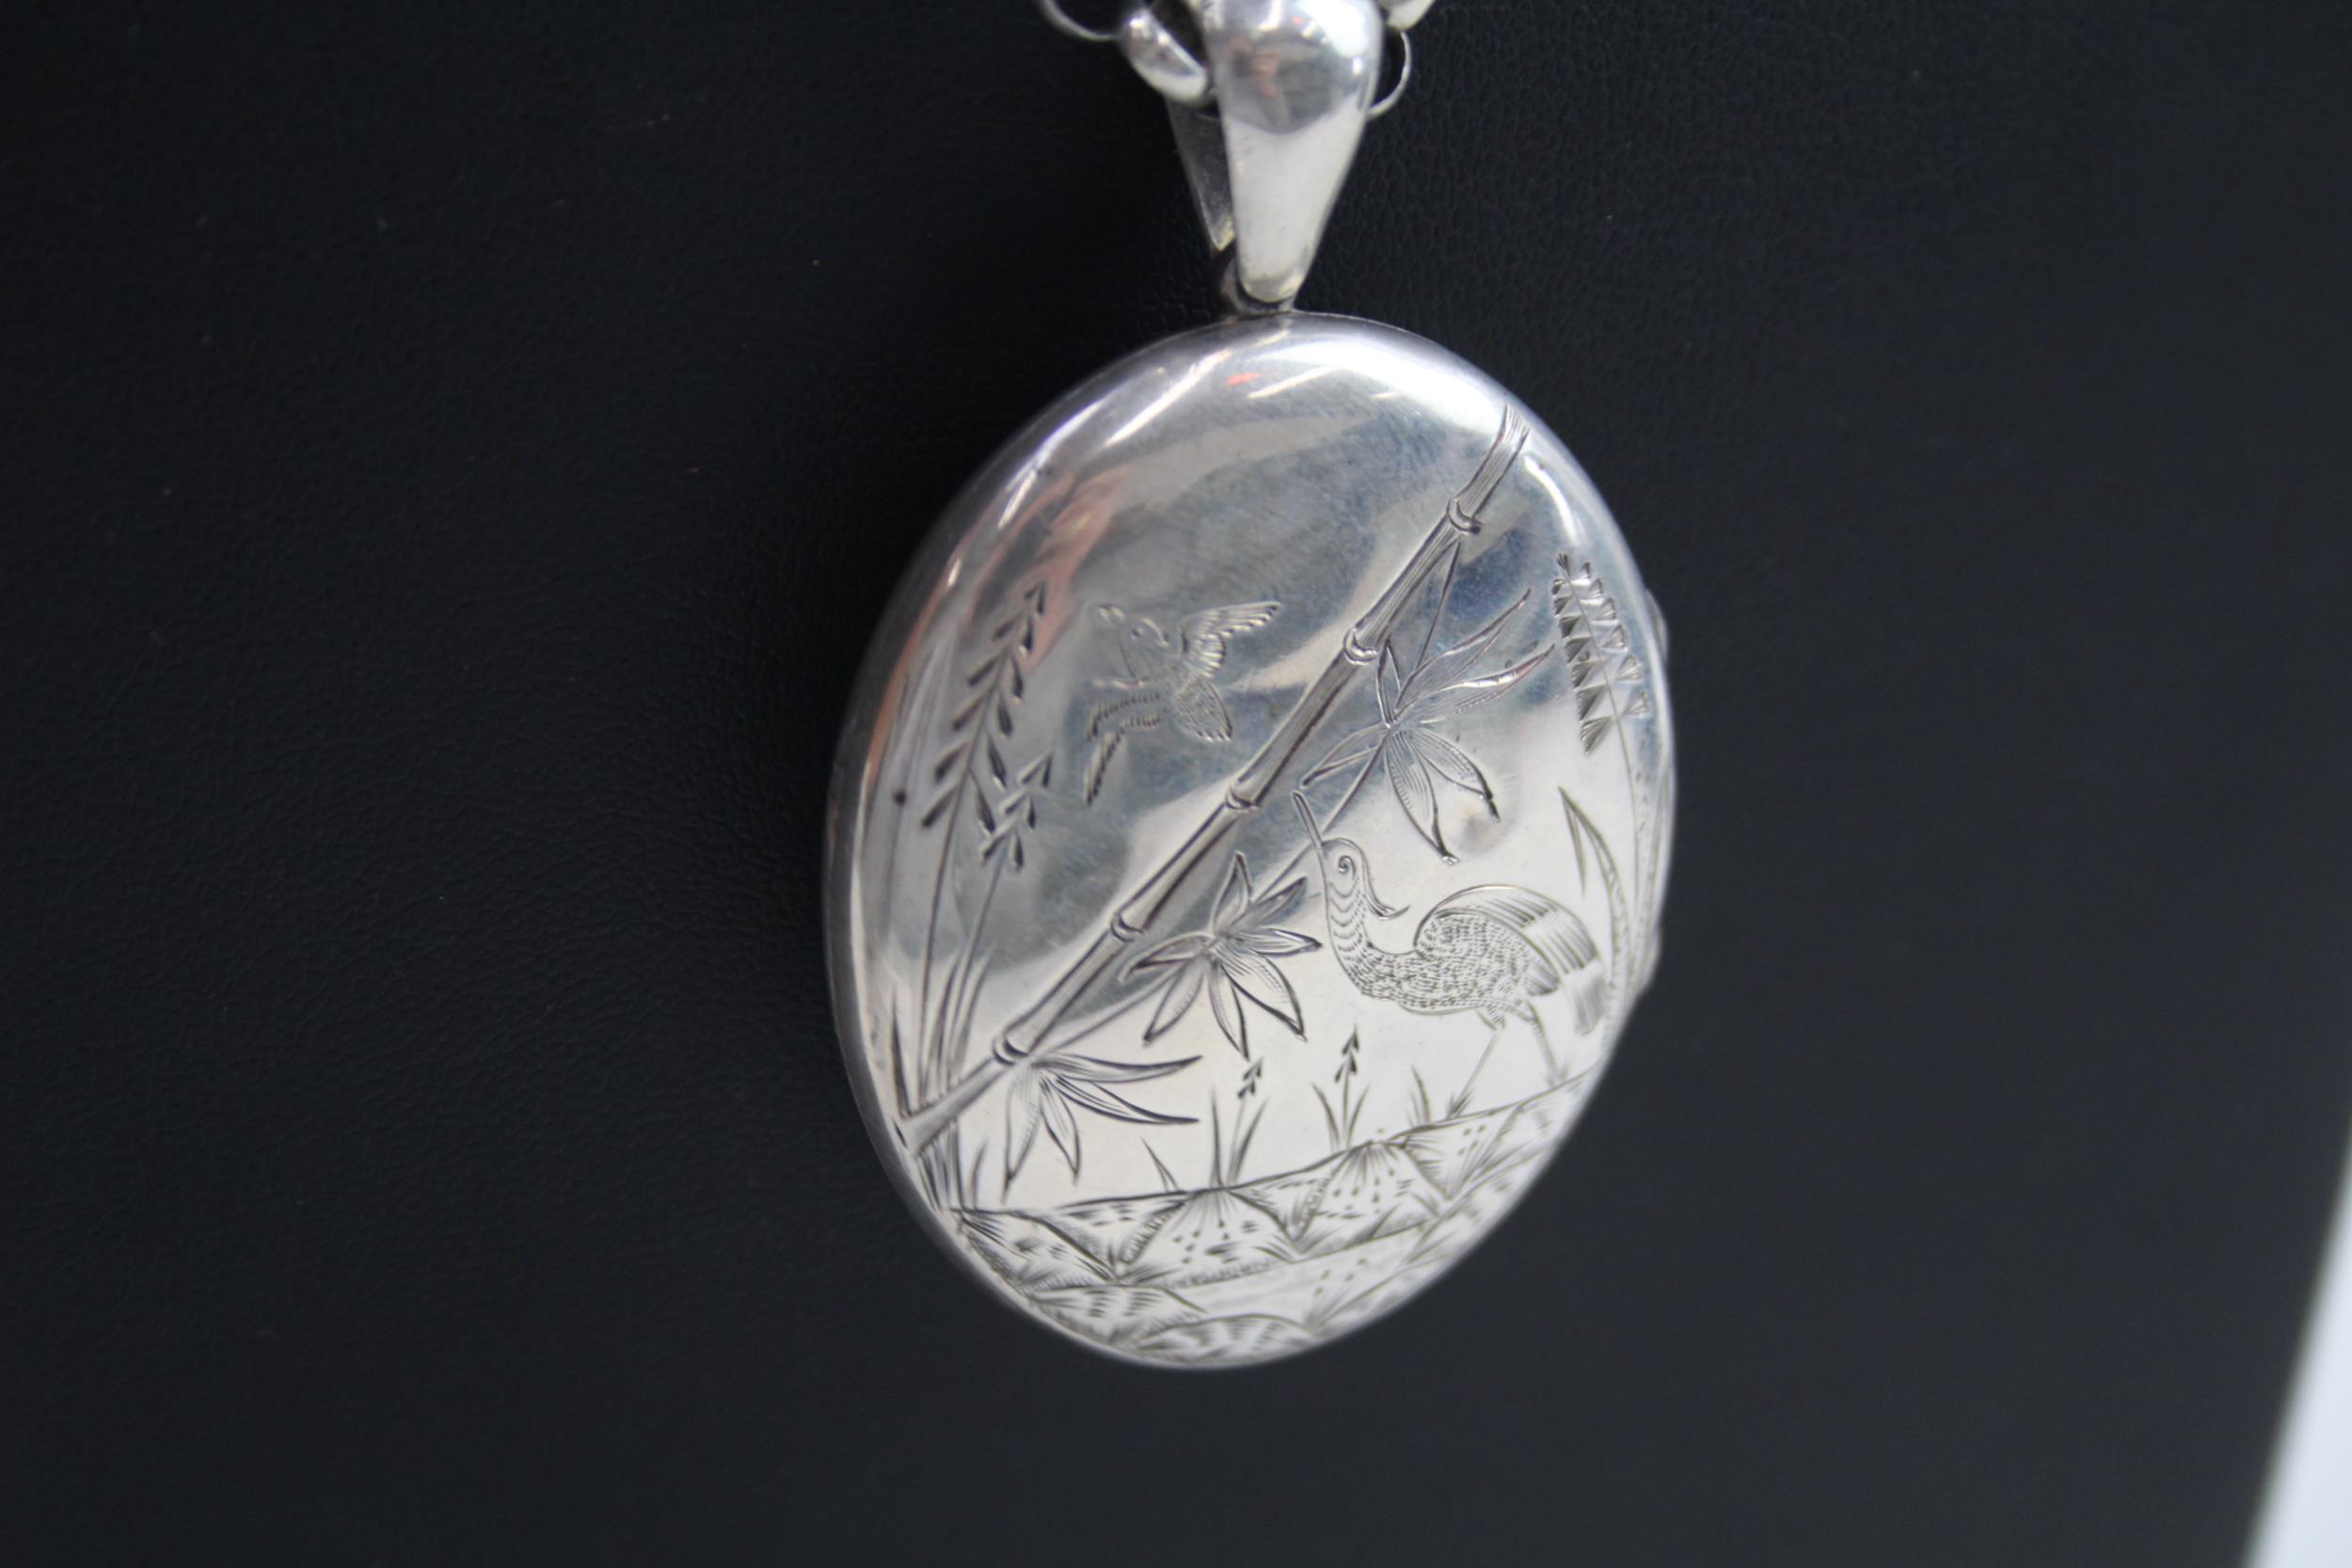 Silver aesthetic movement locket pendant necklace (37g) - Image 4 of 5